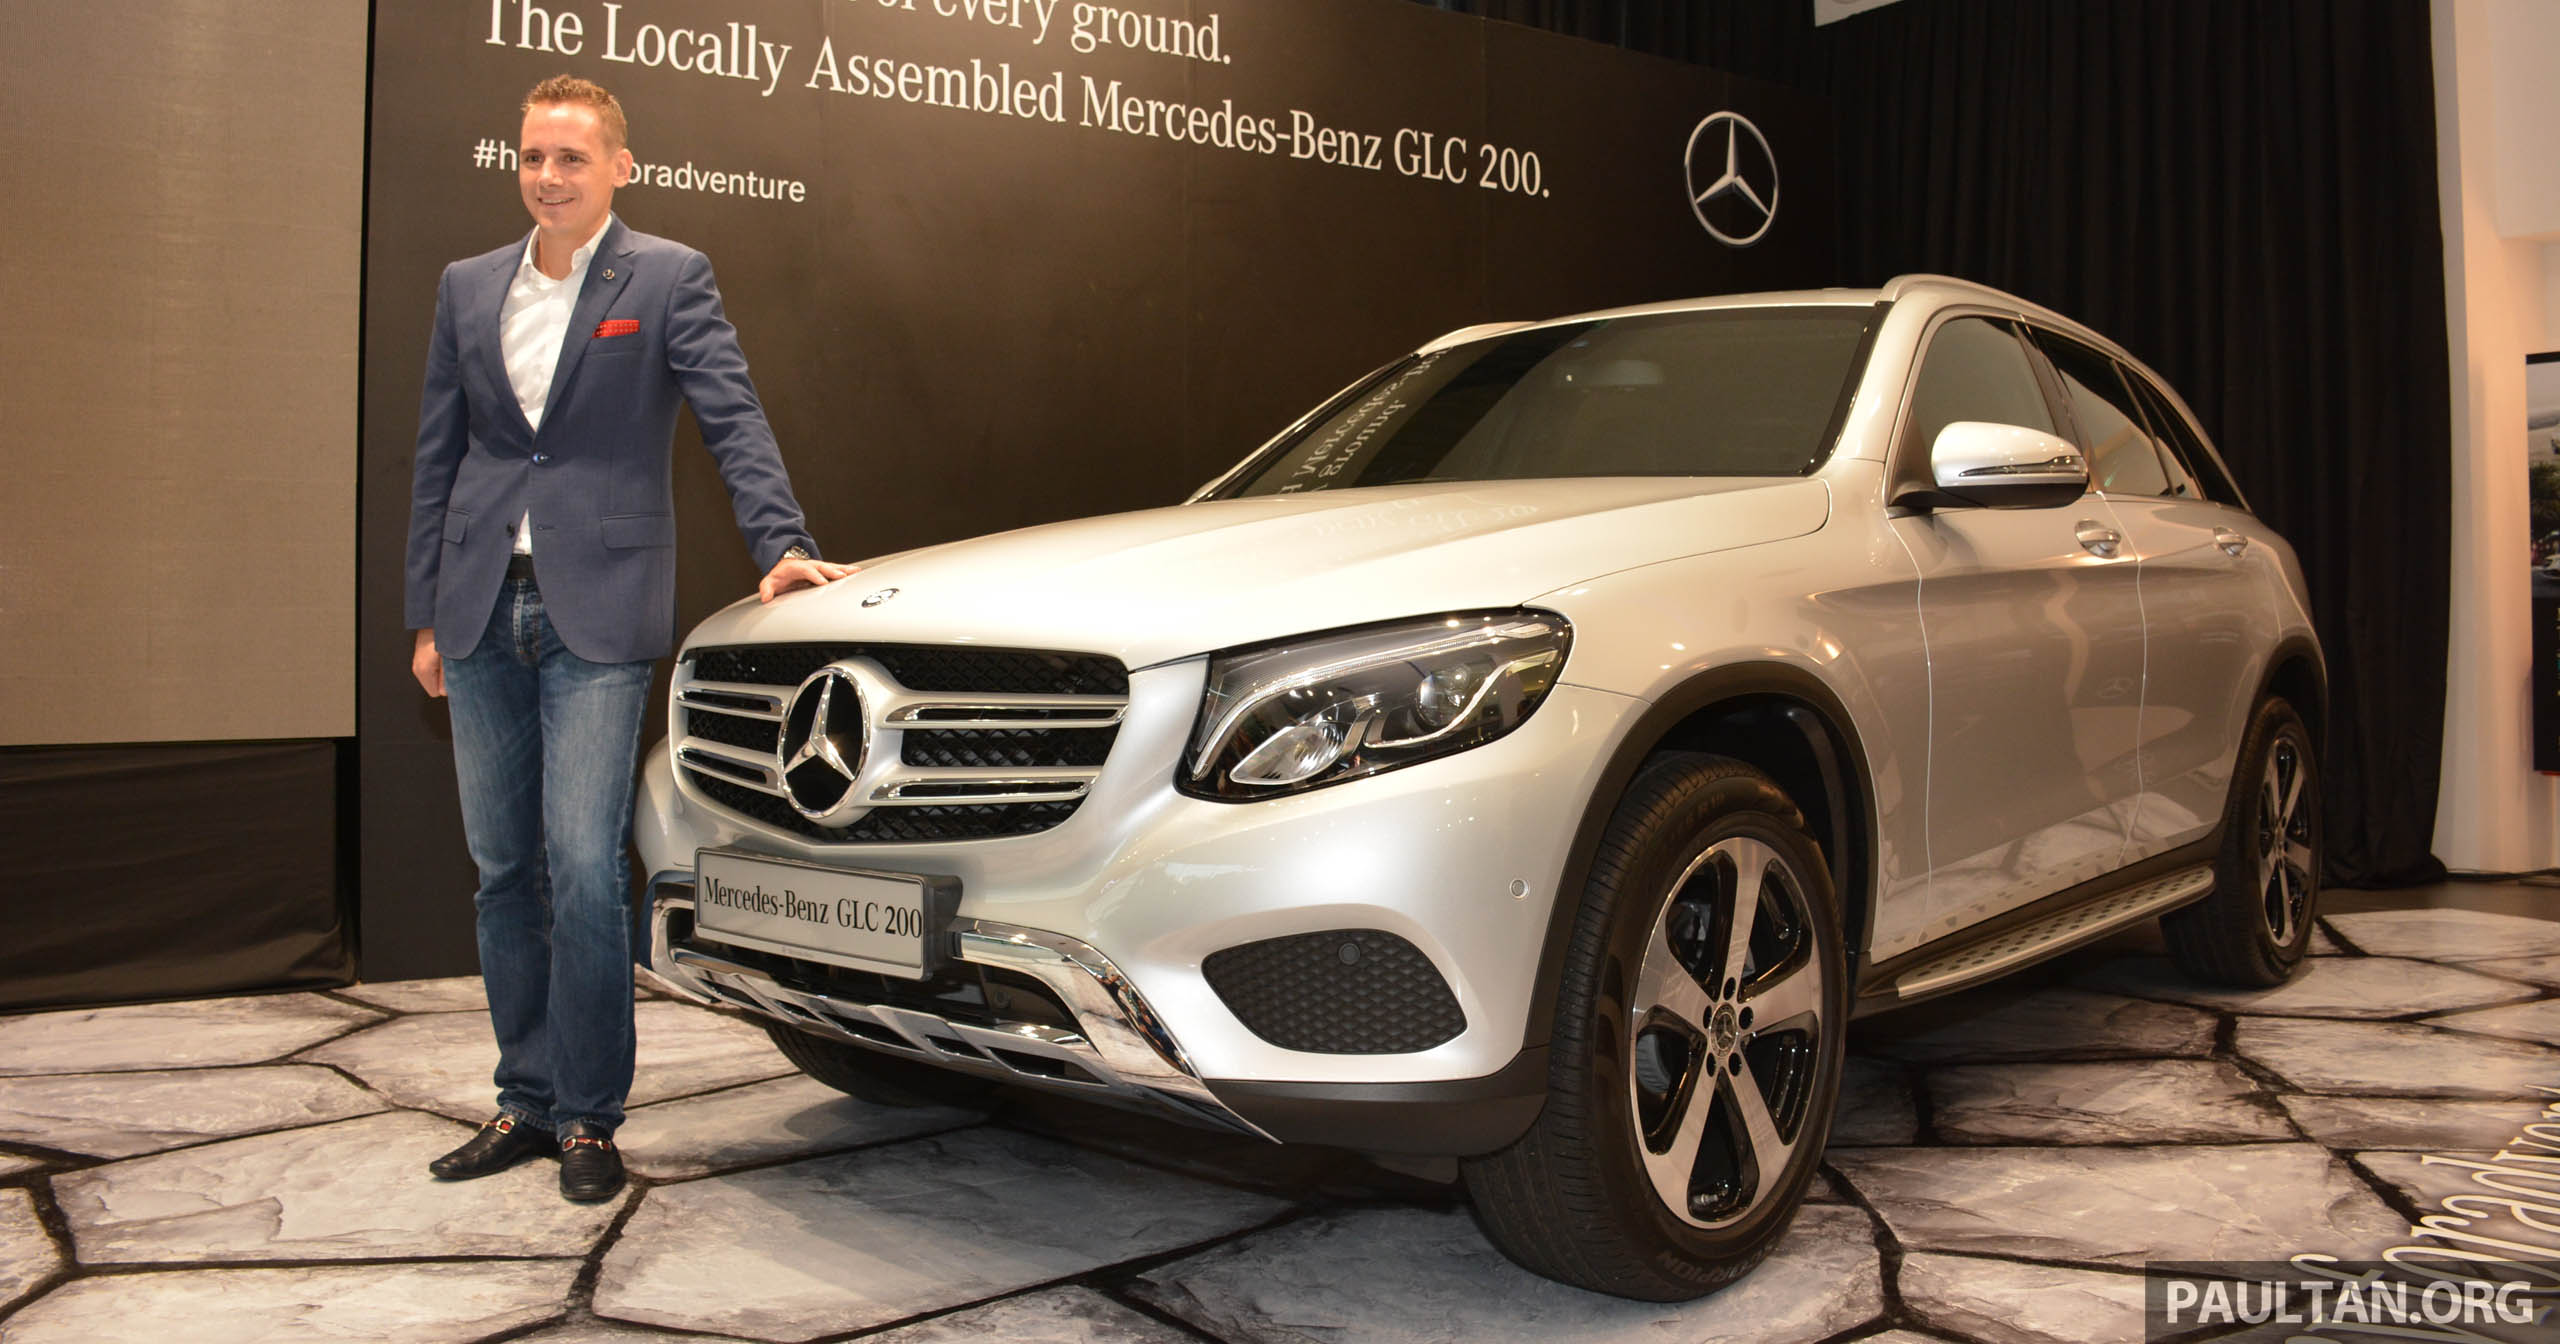 Mercedes Benz GLC price, launch, mileage, bookings, colours and